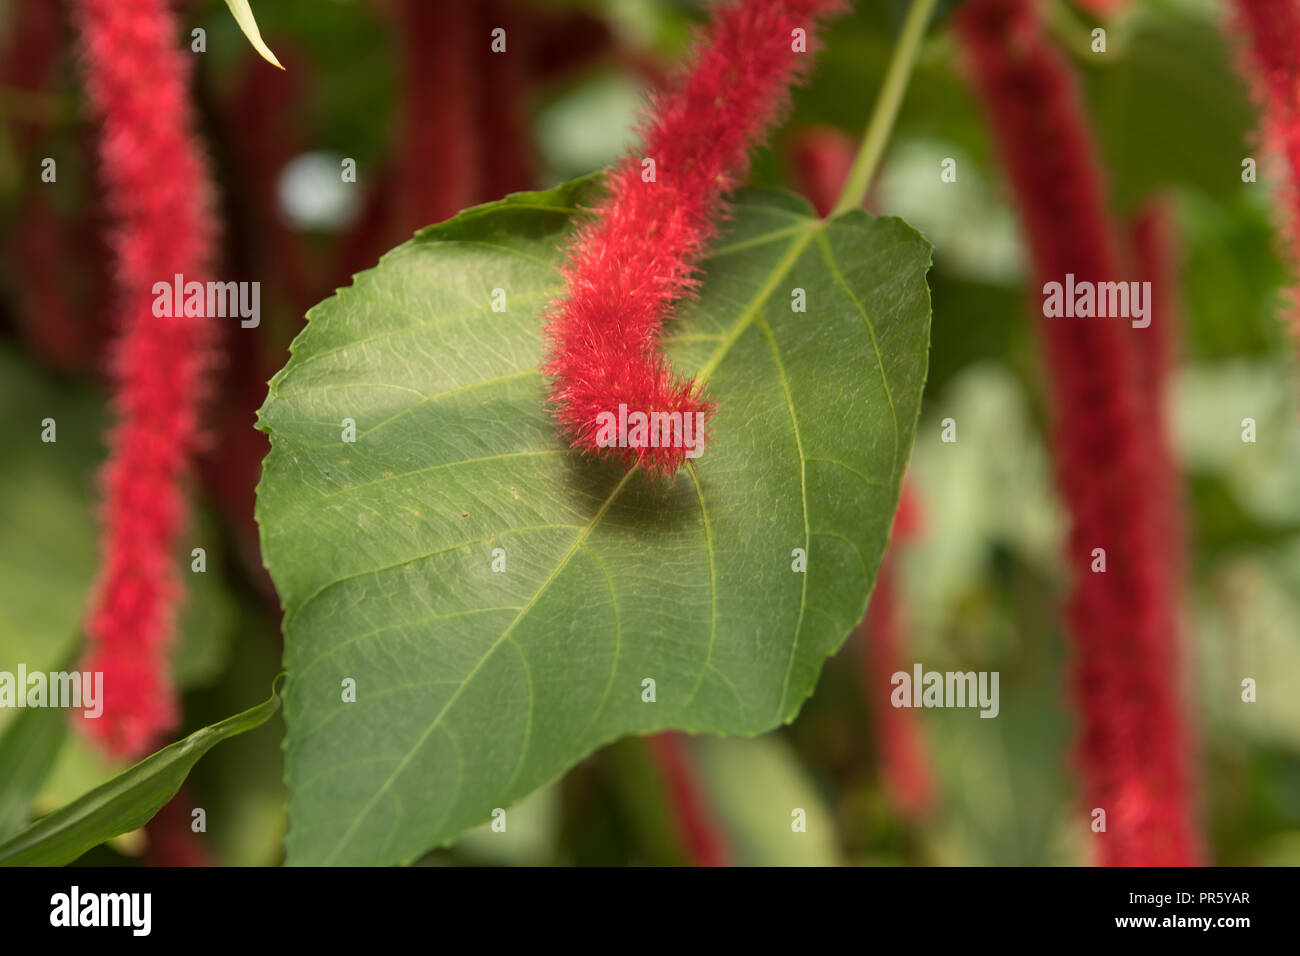 Furry like tail of the Red Hot Cat's Tail plant Stock Photo